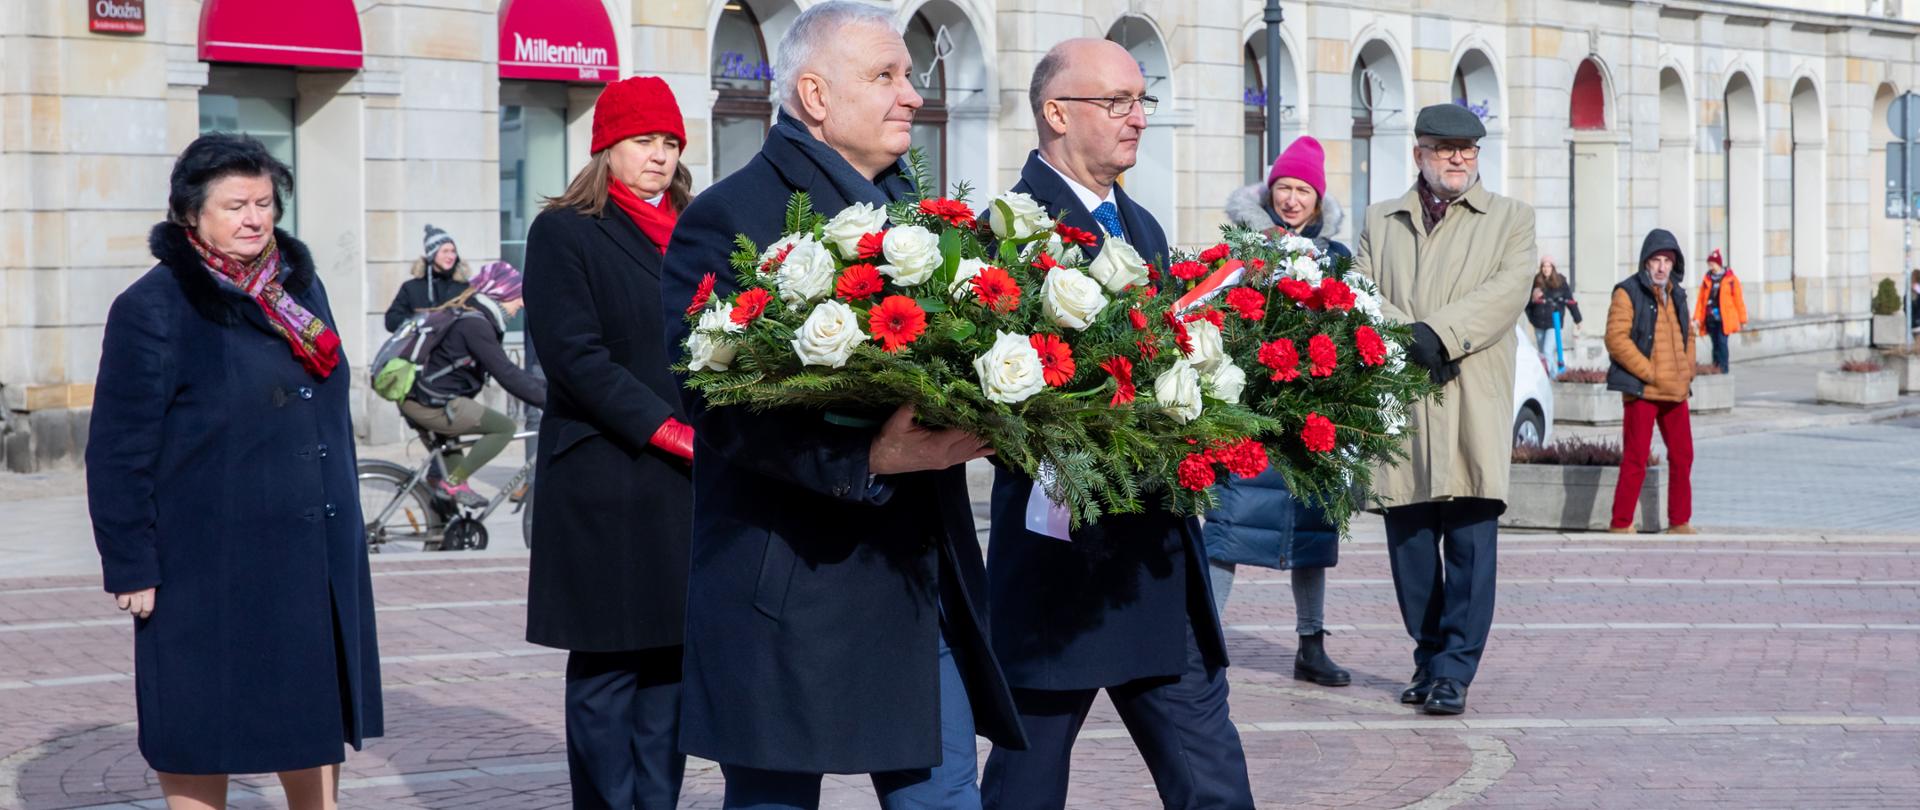 Deputy Minister Piotr Wawrzyk laid flowers at the Nicolaus Copernicus Monument to commemorate the 550th anniversary of the astronomer’s birth.